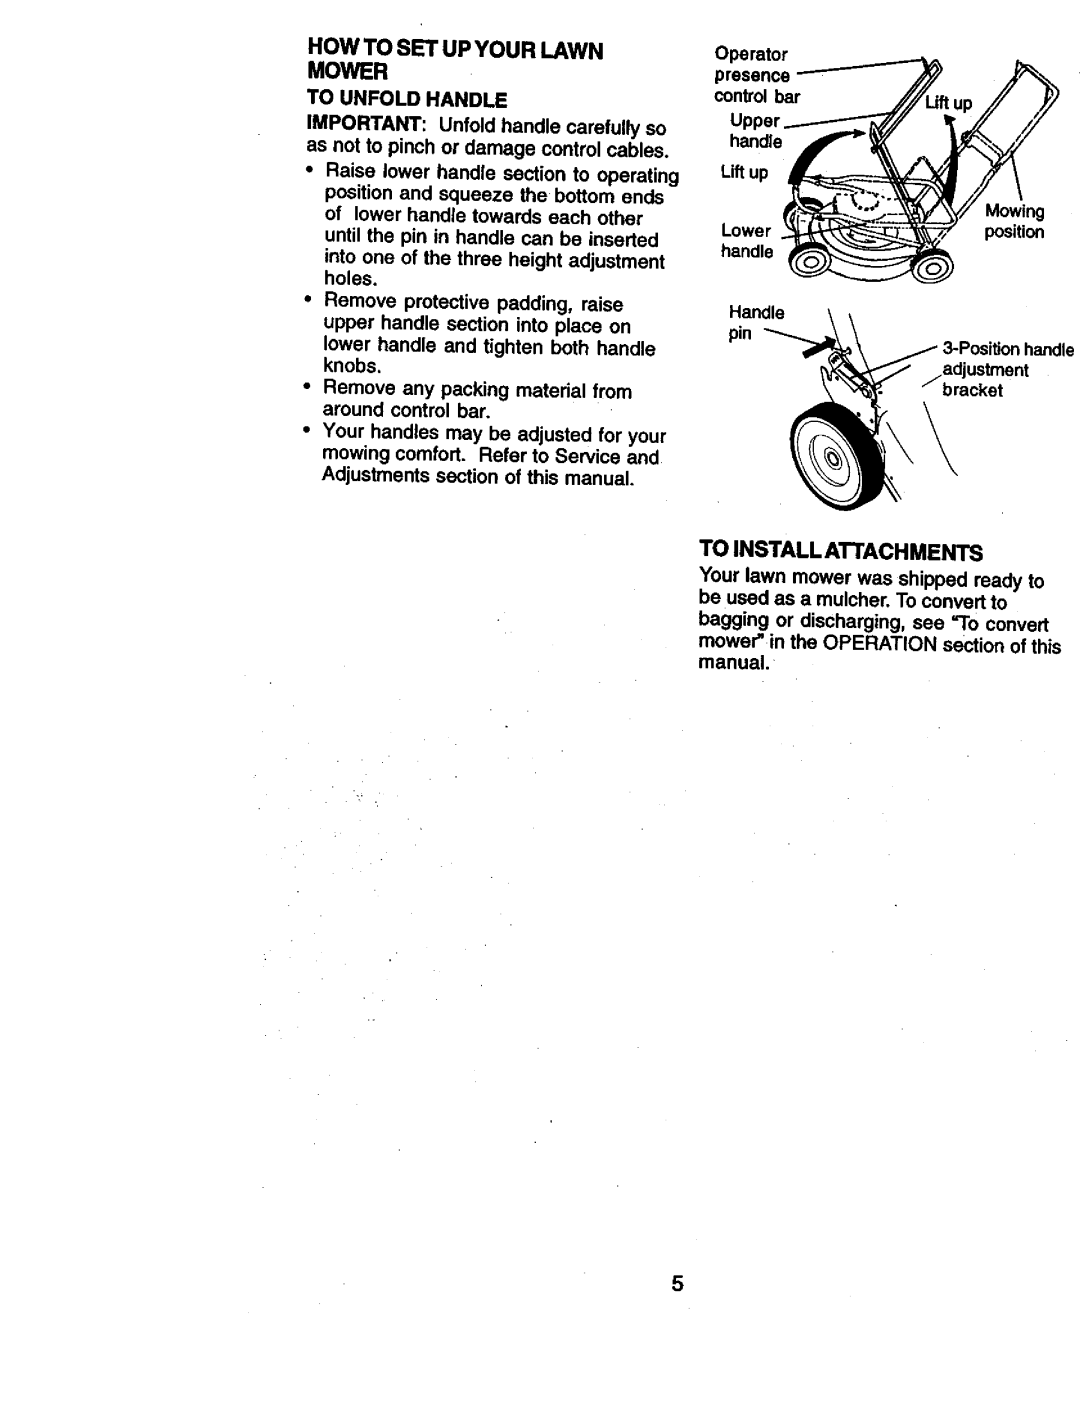 Craftsman 917.38836 owner manual Howto Set Up Your Lawn Mower, To Install Attachments 